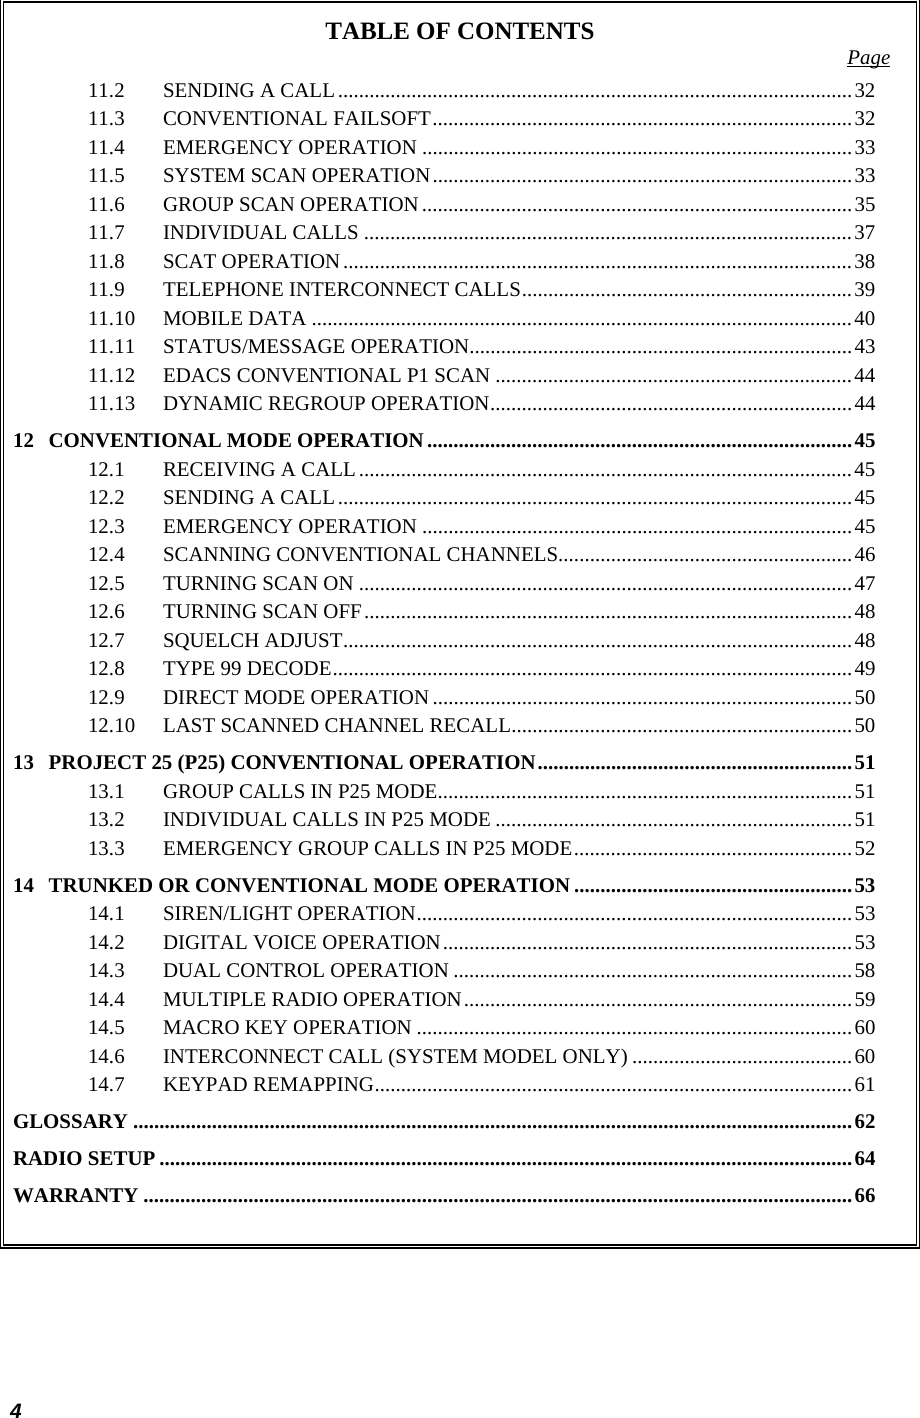  4 TABLE OF CONTENTS  Page 11.2 SENDING A CALL..................................................................................................32 11.3 CONVENTIONAL FAILSOFT................................................................................32 11.4 EMERGENCY OPERATION ..................................................................................33 11.5 SYSTEM SCAN OPERATION................................................................................33 11.6 GROUP SCAN OPERATION ..................................................................................35 11.7 INDIVIDUAL CALLS .............................................................................................37 11.8 SCAT OPERATION.................................................................................................38 11.9 TELEPHONE INTERCONNECT CALLS...............................................................39 11.10 MOBILE DATA .......................................................................................................40 11.11 STATUS/MESSAGE OPERATION.........................................................................43 11.12 EDACS CONVENTIONAL P1 SCAN ....................................................................44 11.13 DYNAMIC REGROUP OPERATION.....................................................................44 12 CONVENTIONAL MODE OPERATION.................................................................................45 12.1 RECEIVING A CALL..............................................................................................45 12.2 SENDING A CALL..................................................................................................45 12.3 EMERGENCY OPERATION ..................................................................................45 12.4 SCANNING CONVENTIONAL CHANNELS........................................................46 12.5 TURNING SCAN ON ..............................................................................................47 12.6 TURNING SCAN OFF.............................................................................................48 12.7 SQUELCH ADJUST.................................................................................................48 12.8 TYPE 99 DECODE...................................................................................................49 12.9 DIRECT MODE OPERATION ................................................................................50 12.10 LAST SCANNED CHANNEL RECALL.................................................................50 13 PROJECT 25 (P25) CONVENTIONAL OPERATION............................................................51 13.1 GROUP CALLS IN P25 MODE...............................................................................51 13.2 INDIVIDUAL CALLS IN P25 MODE ....................................................................51 13.3 EMERGENCY GROUP CALLS IN P25 MODE.....................................................52 14 TRUNKED OR CONVENTIONAL MODE OPERATION .....................................................53 14.1 SIREN/LIGHT OPERATION...................................................................................53 14.2 DIGITAL VOICE OPERATION..............................................................................53 14.3 DUAL CONTROL OPERATION ............................................................................58 14.4 MULTIPLE RADIO OPERATION..........................................................................59 14.5 MACRO KEY OPERATION ...................................................................................60 14.6 INTERCONNECT CALL (SYSTEM MODEL ONLY) ..........................................60 14.7 KEYPAD REMAPPING...........................................................................................61 GLOSSARY .........................................................................................................................................62 RADIO SETUP ....................................................................................................................................64 WARRANTY .......................................................................................................................................66  